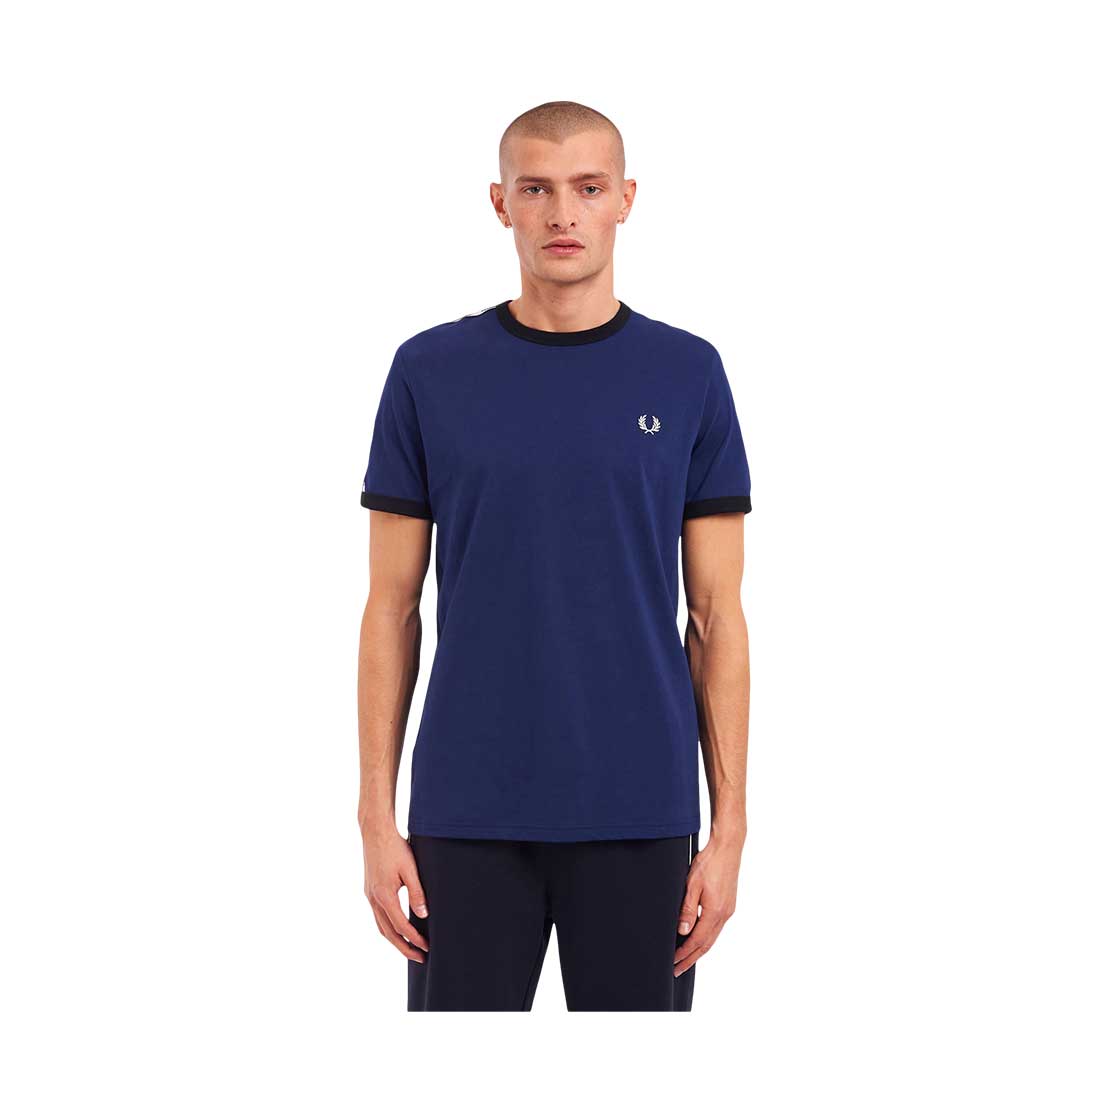 Fred Perry T-Shirt MAR - M6347-143-205